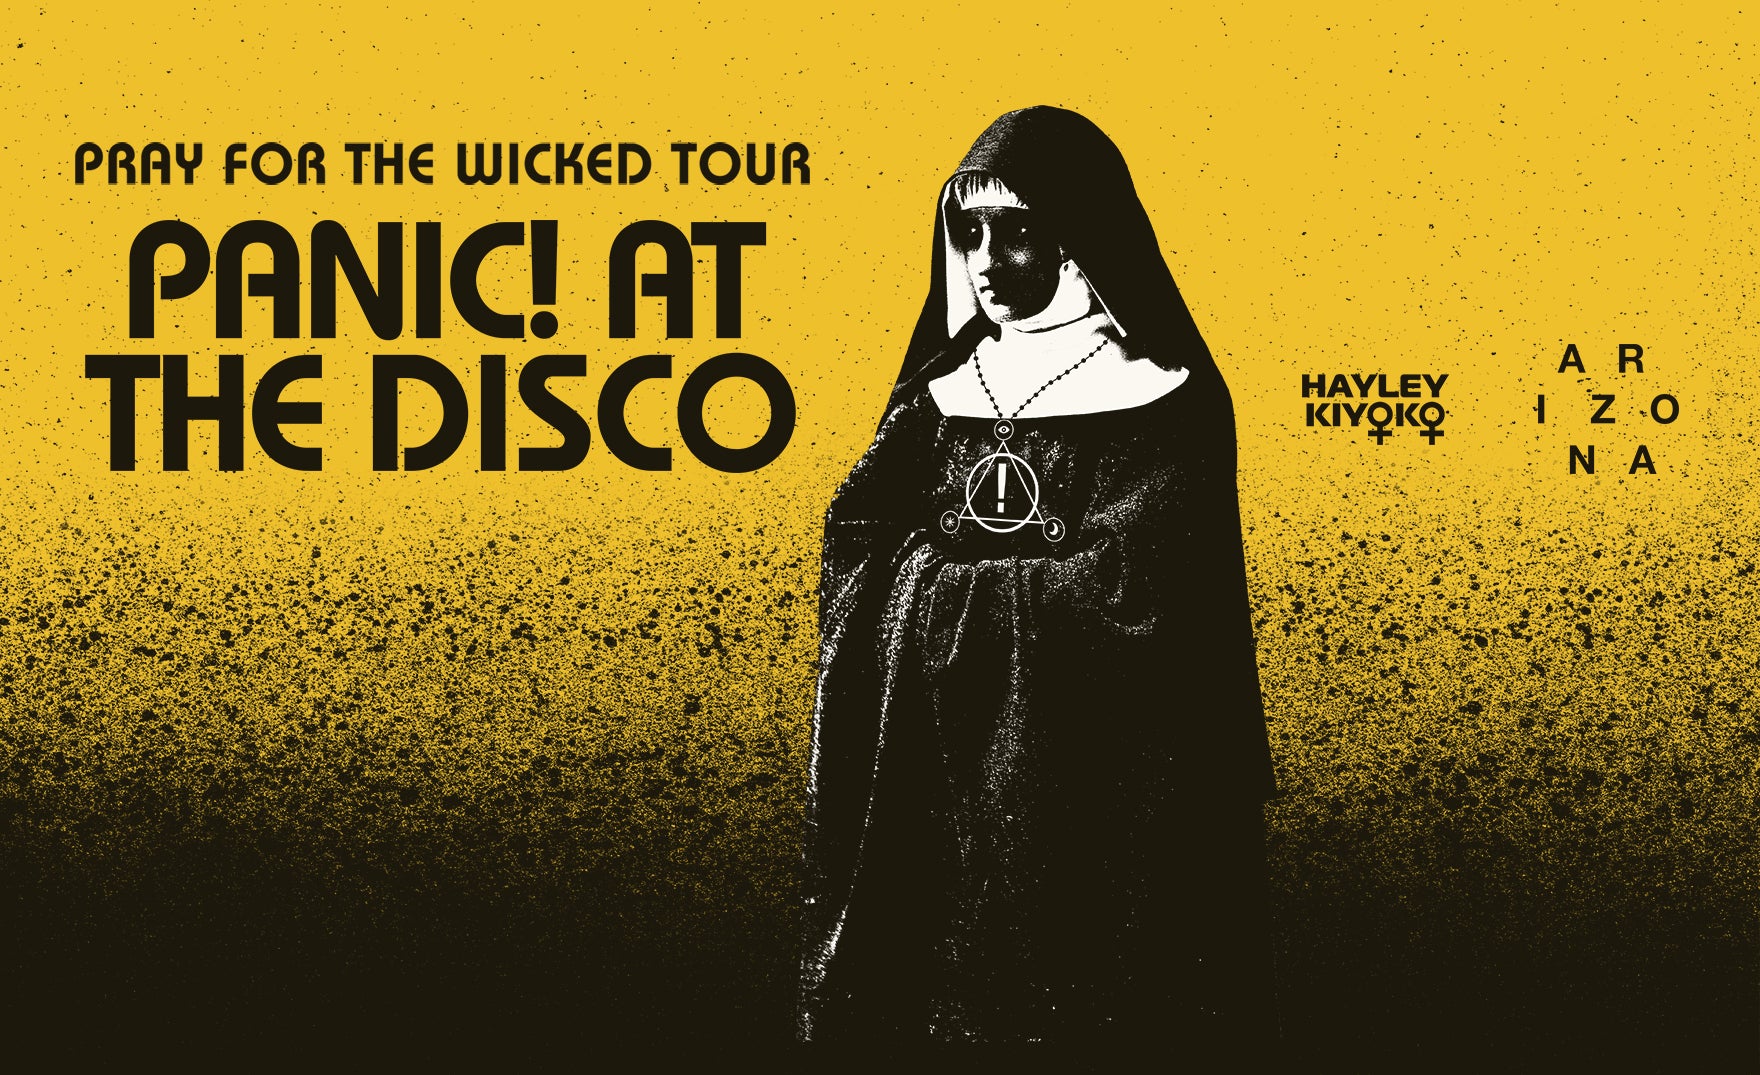 Panic! At The Disco: Pray For The Wicked Tour 